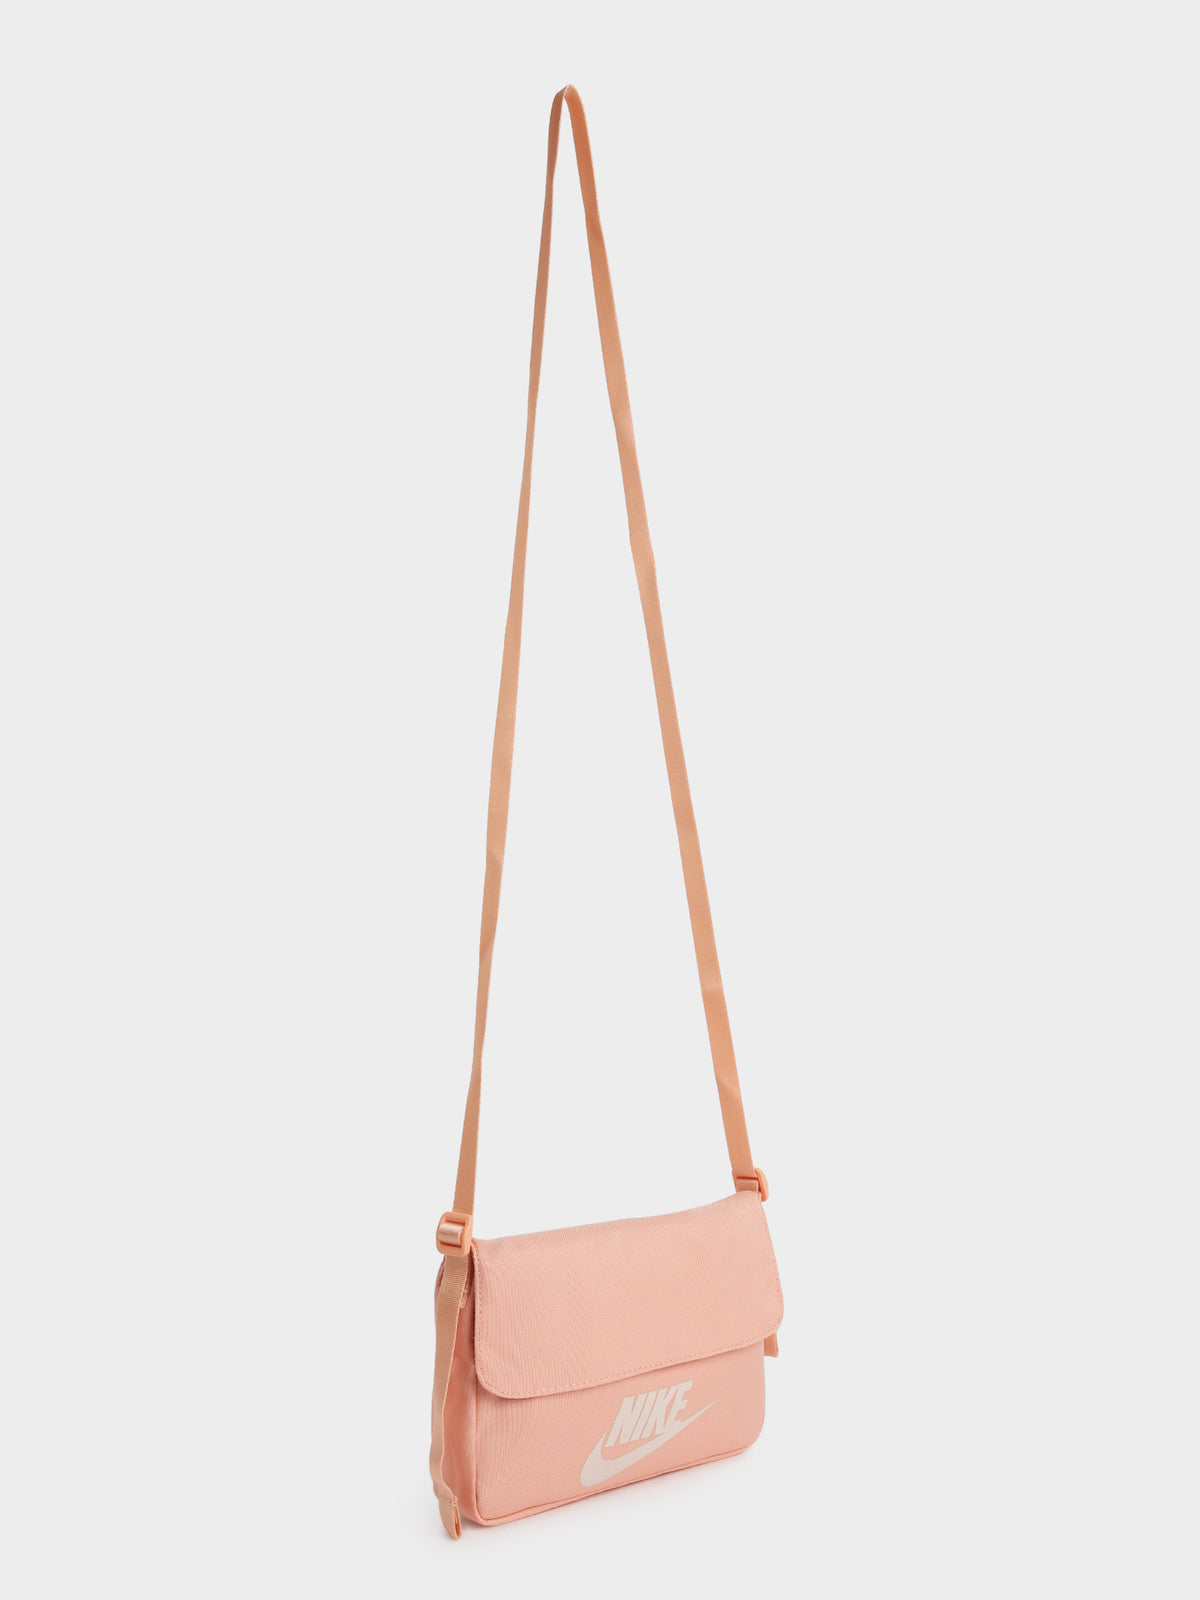 NSW Futra Sling Bag in Pink